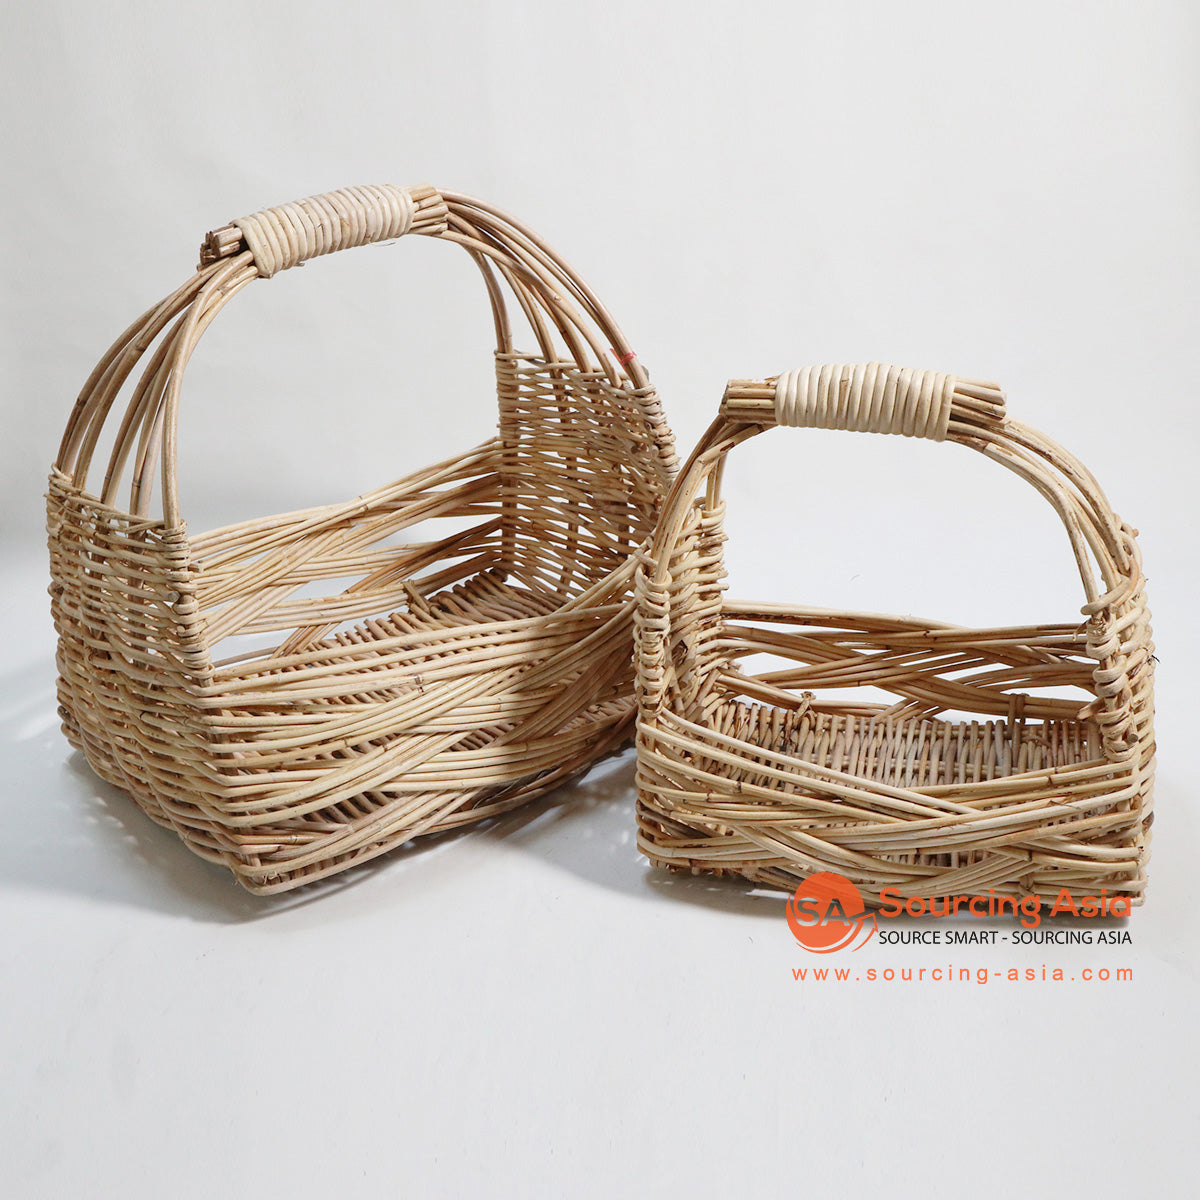 HBSC132 SET OF TWO NATURAL RATTAN FRUIT BASKETS